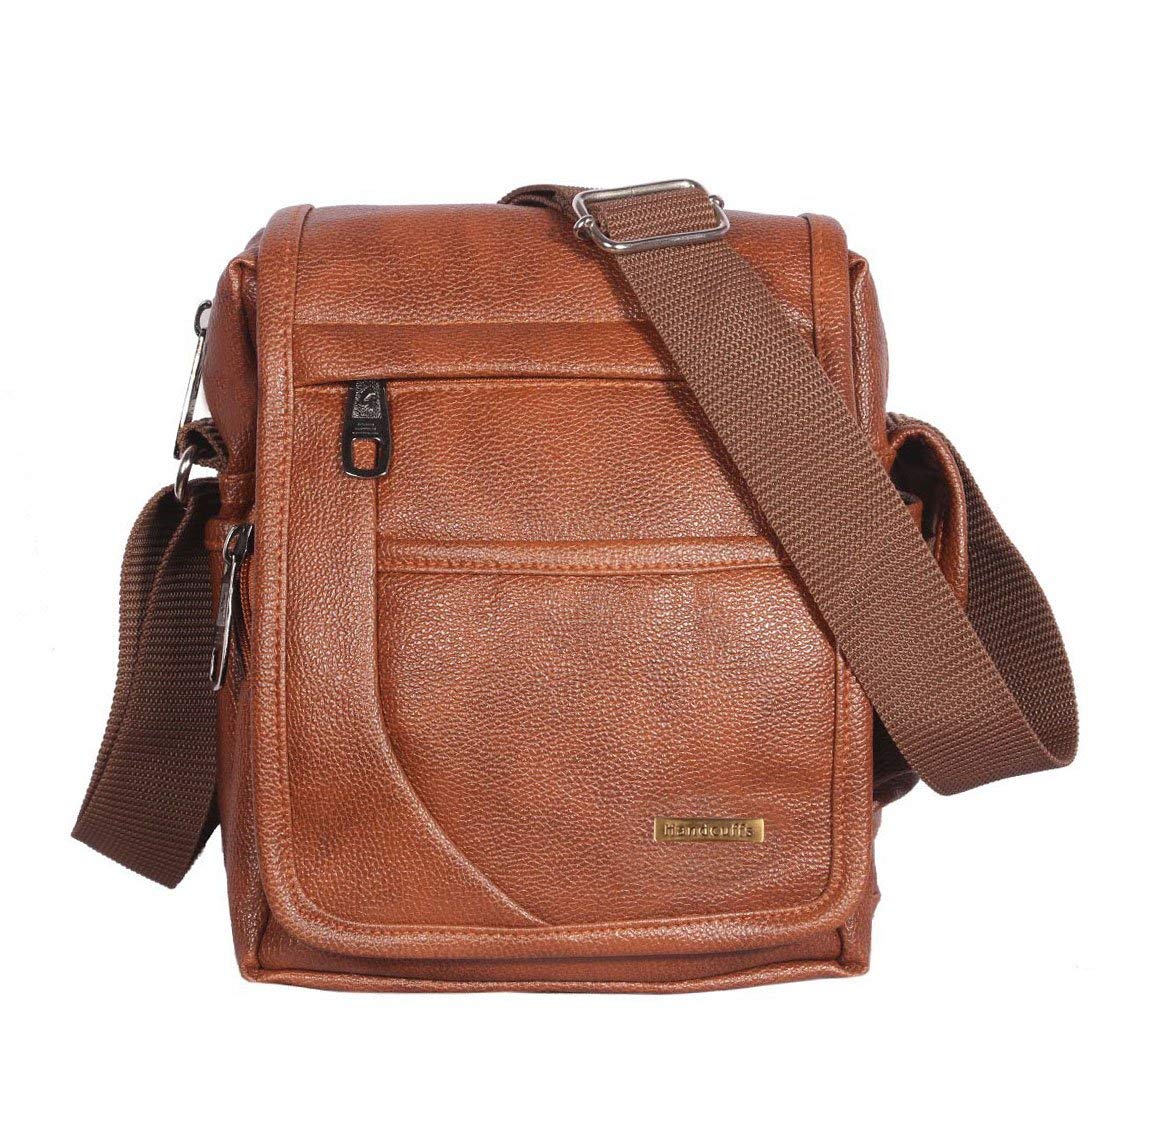 Amazon.com: Taertii Small Leather Messenger Bag for Men, Man Purse  Crossbody Shoulder Bags for Travel Business Hiking Daily Use - 8.6